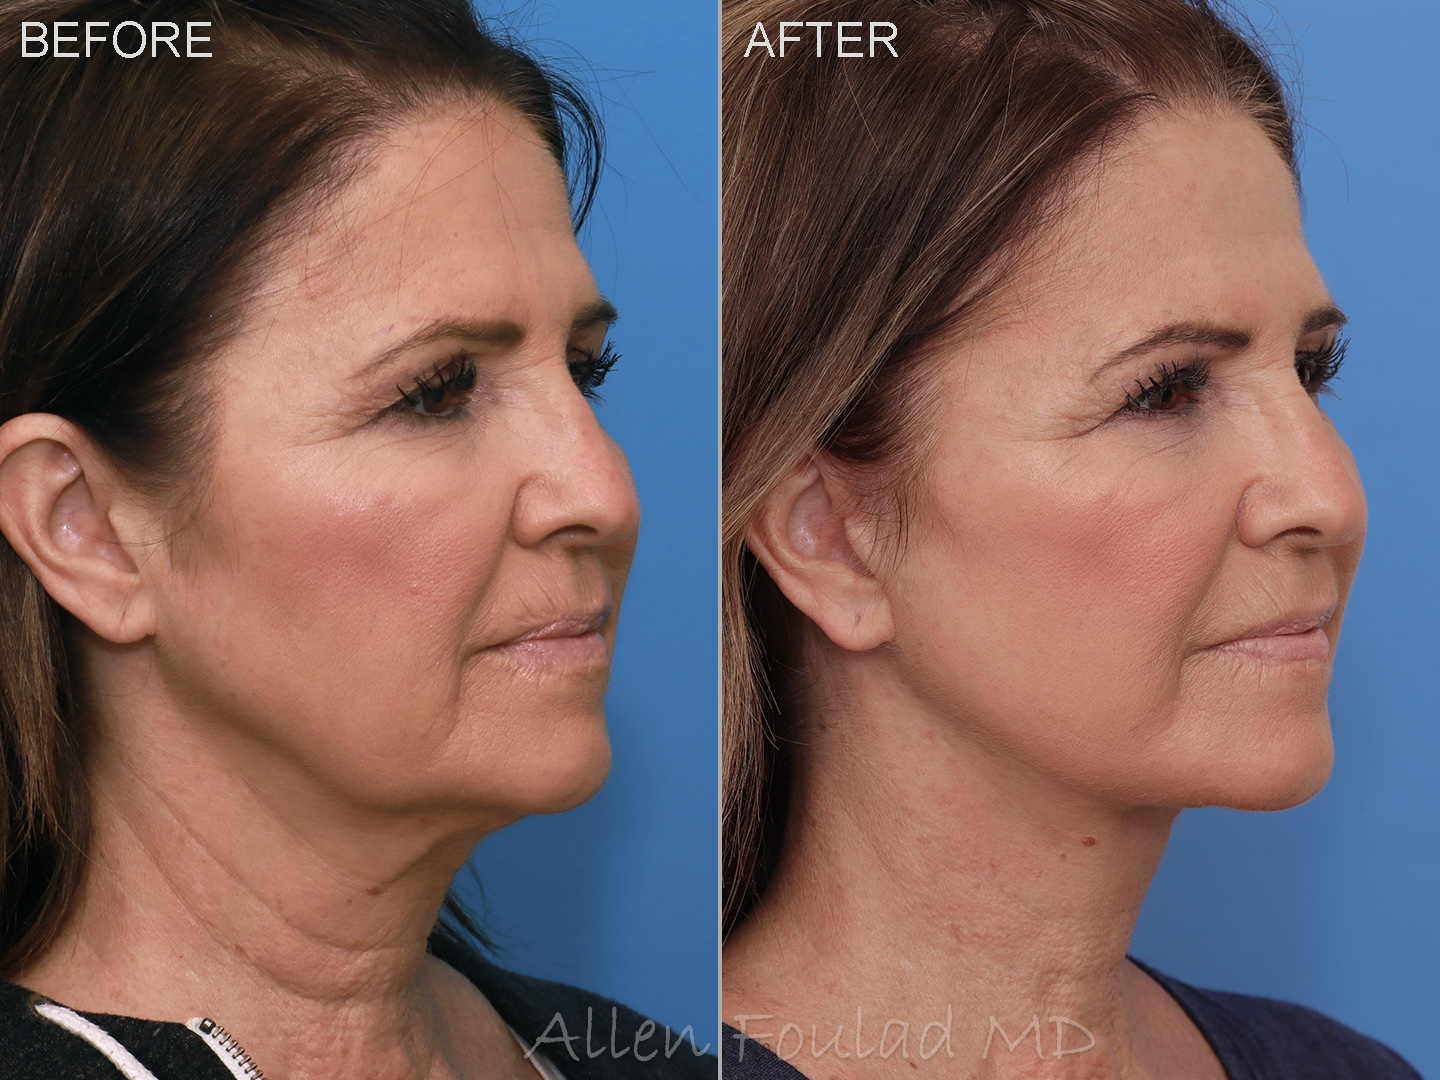 Before and after lower facelift and neck lift. Jowls lifted and loose neck tissues tightened.